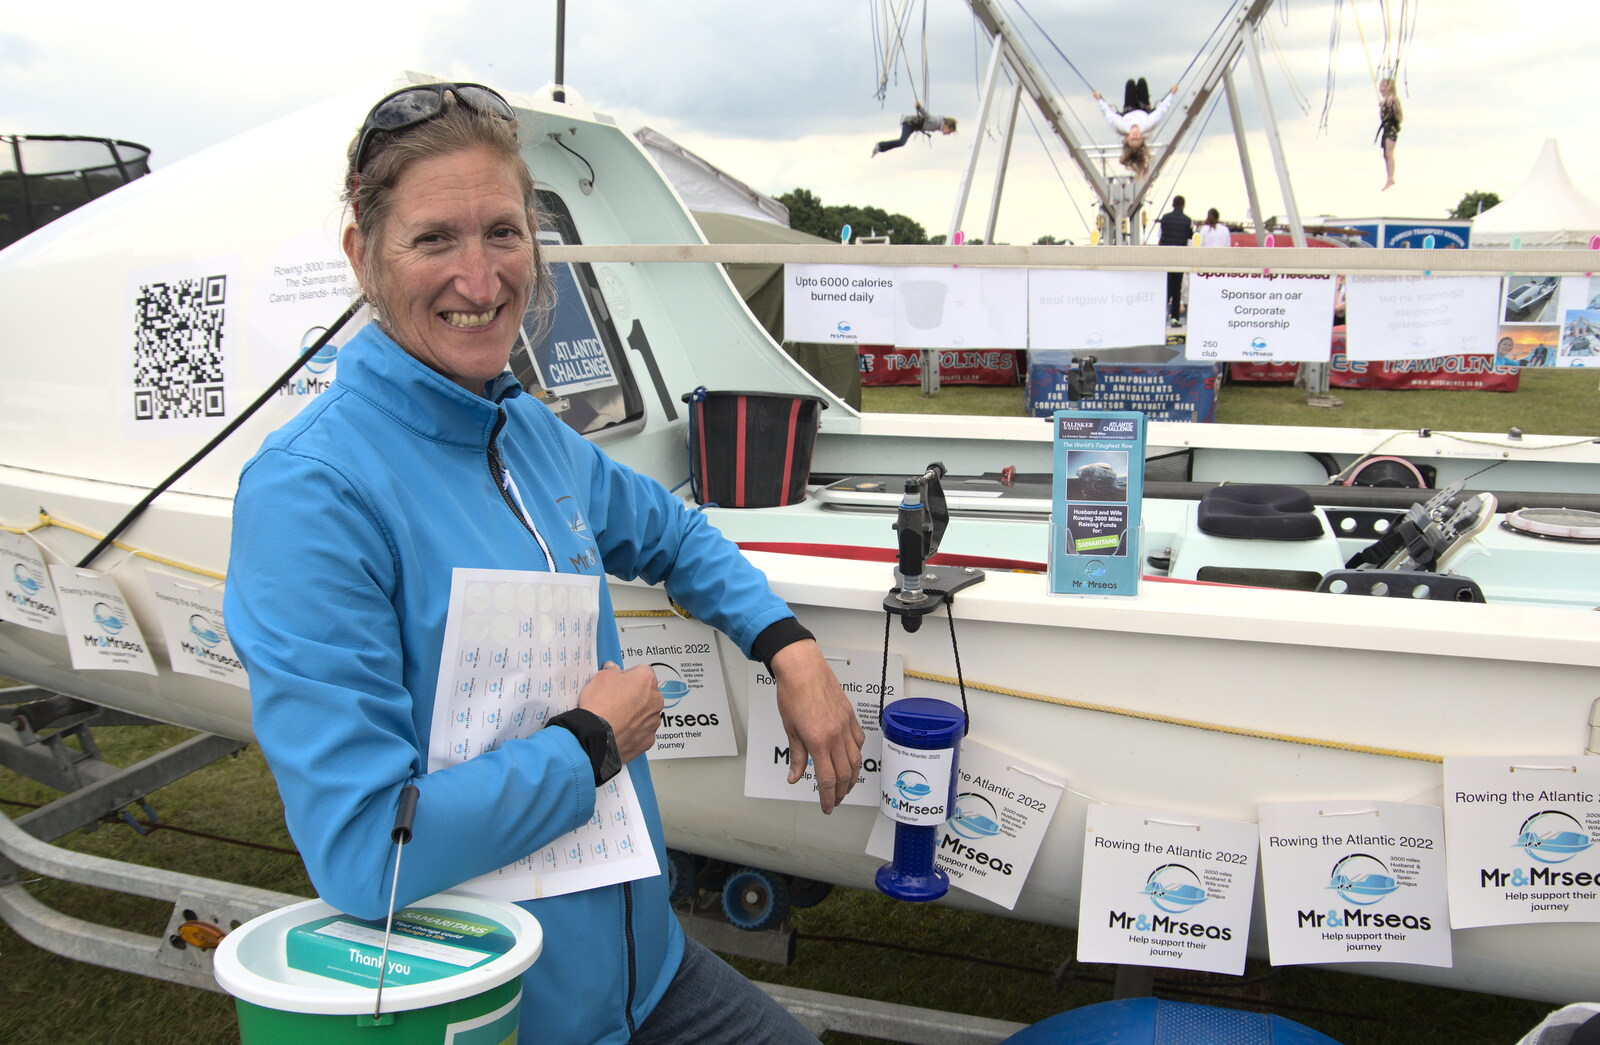 The Suffolk Show, Trinity Park, Ipswich - 1st June 2022: One half of the team rowing the Atlantic Ocean